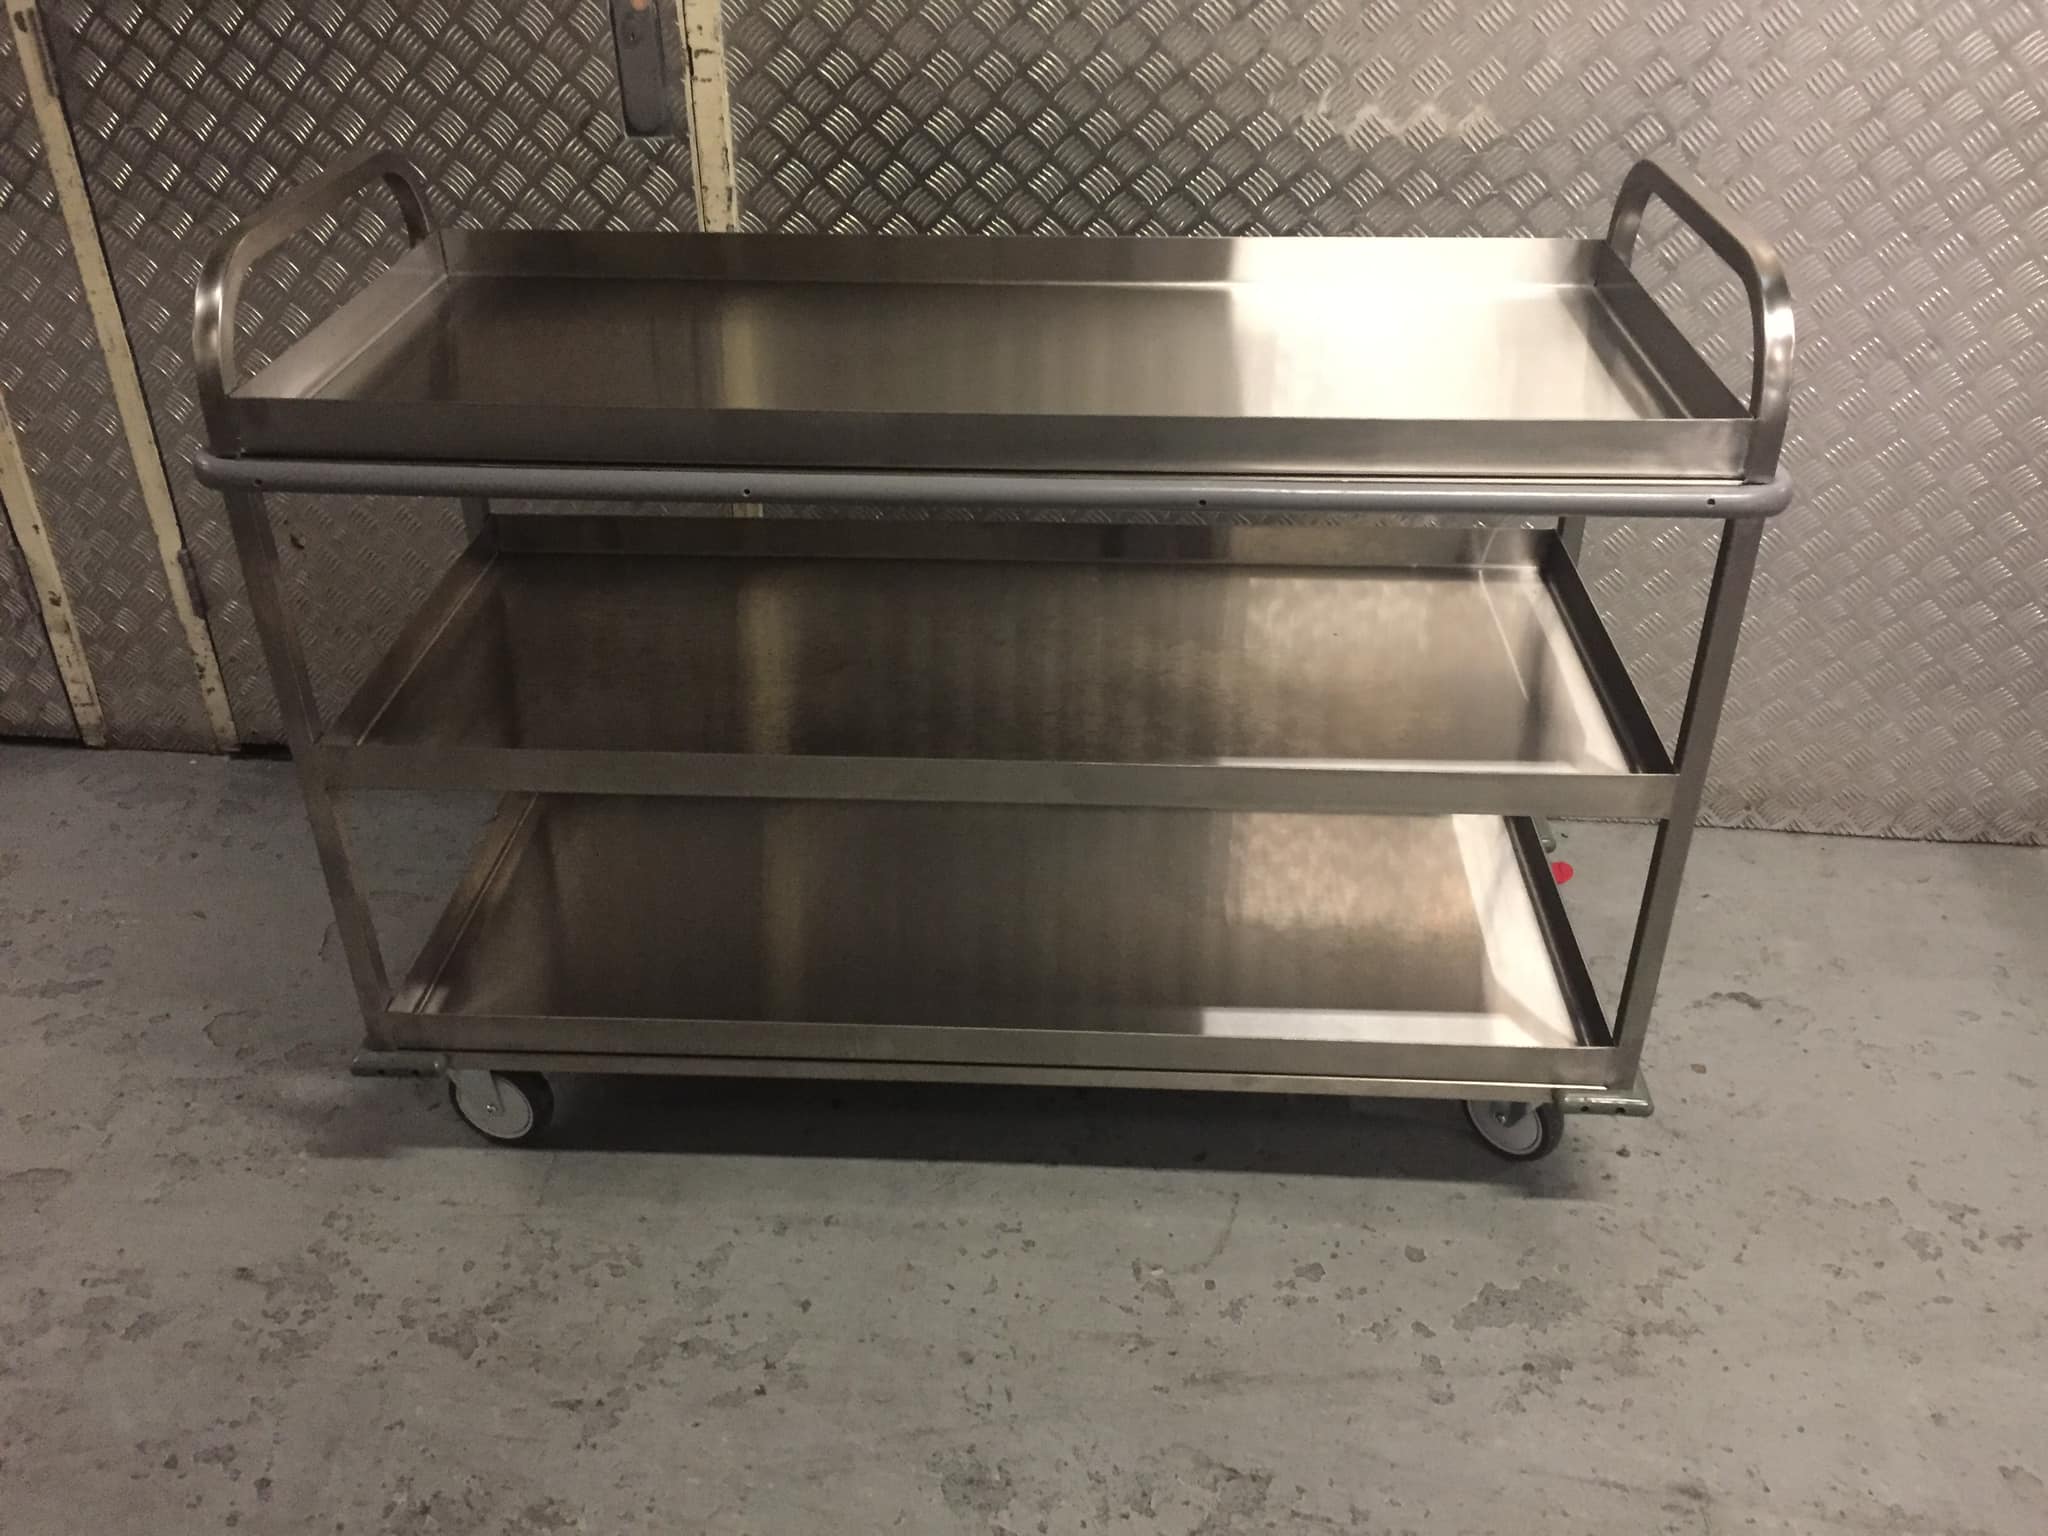 Stainless steel trolley